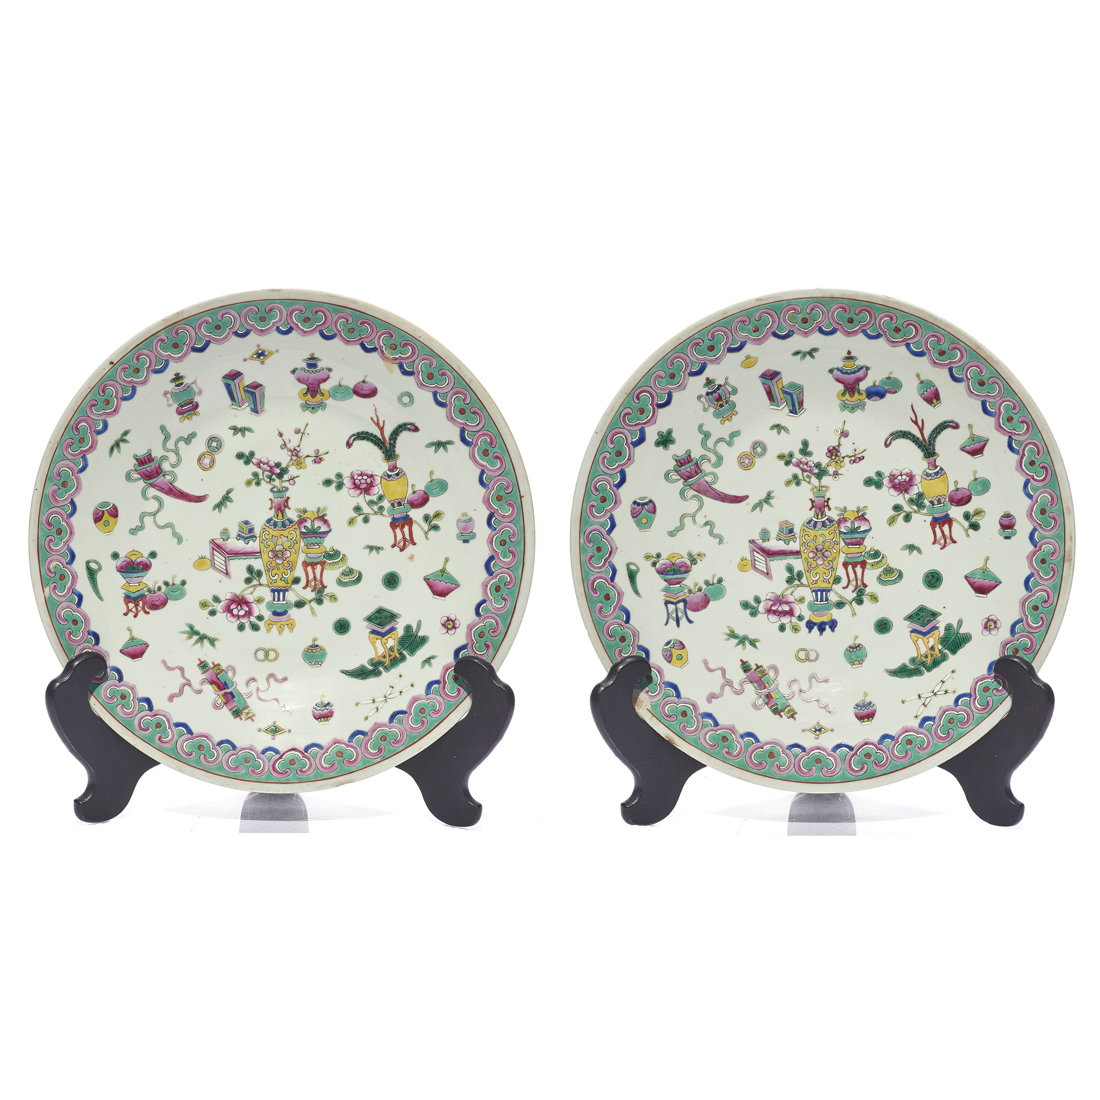 PAIR OF CHINESE FAMILLE ROSE CHARGERS